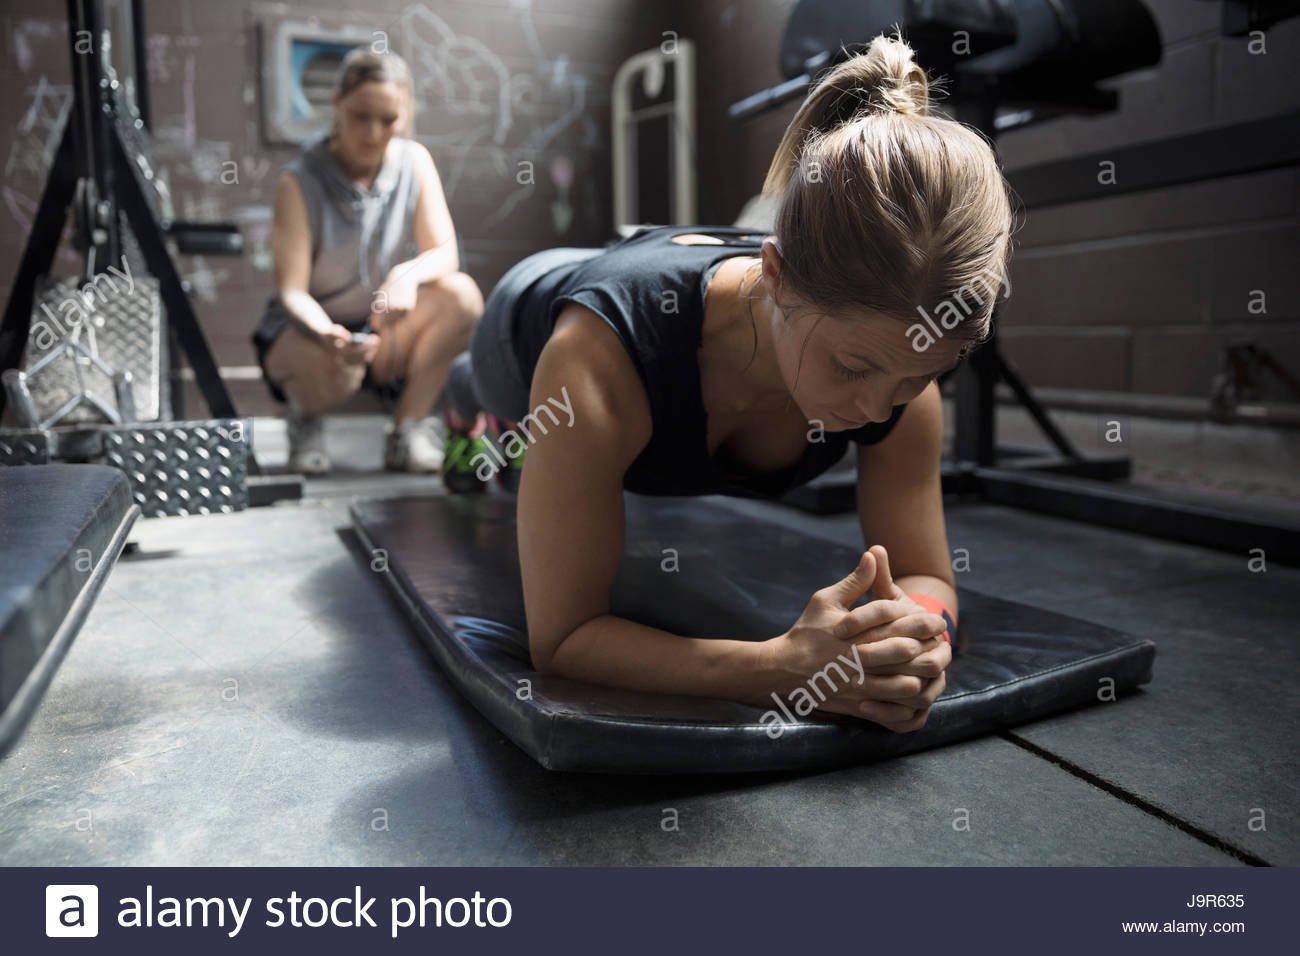 Personal trainer timing female client doing plank exercise in gritty gym Stock Photo